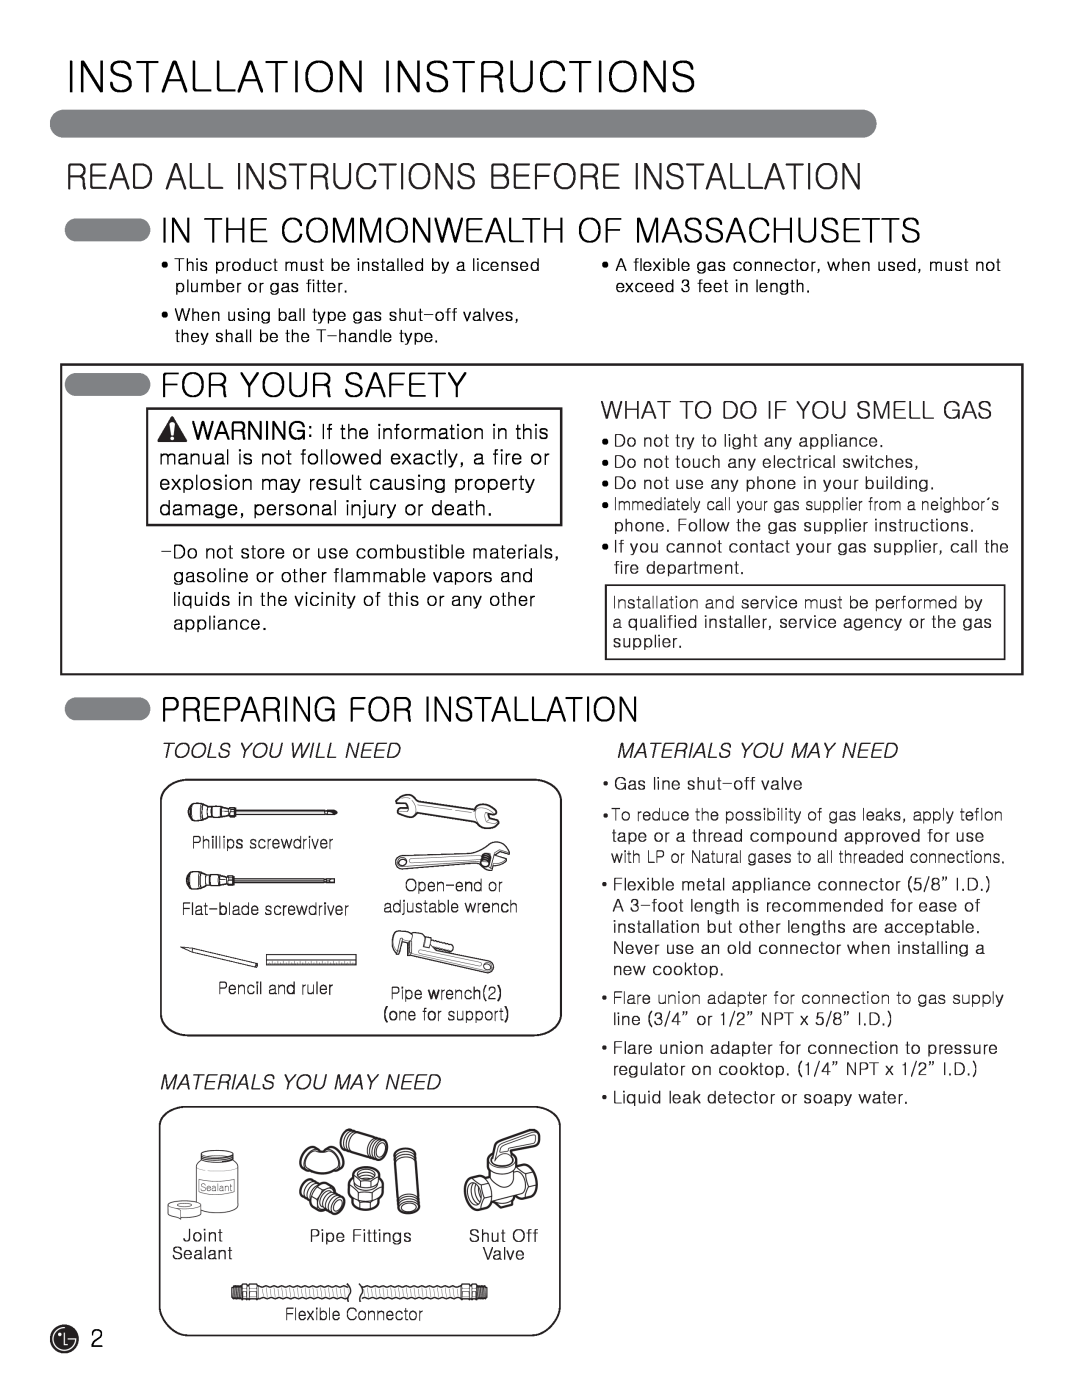 LG Electronics MFL62725501 Installation Instructions, In The Commonwealth Of Massachusetts, For Your Safety 